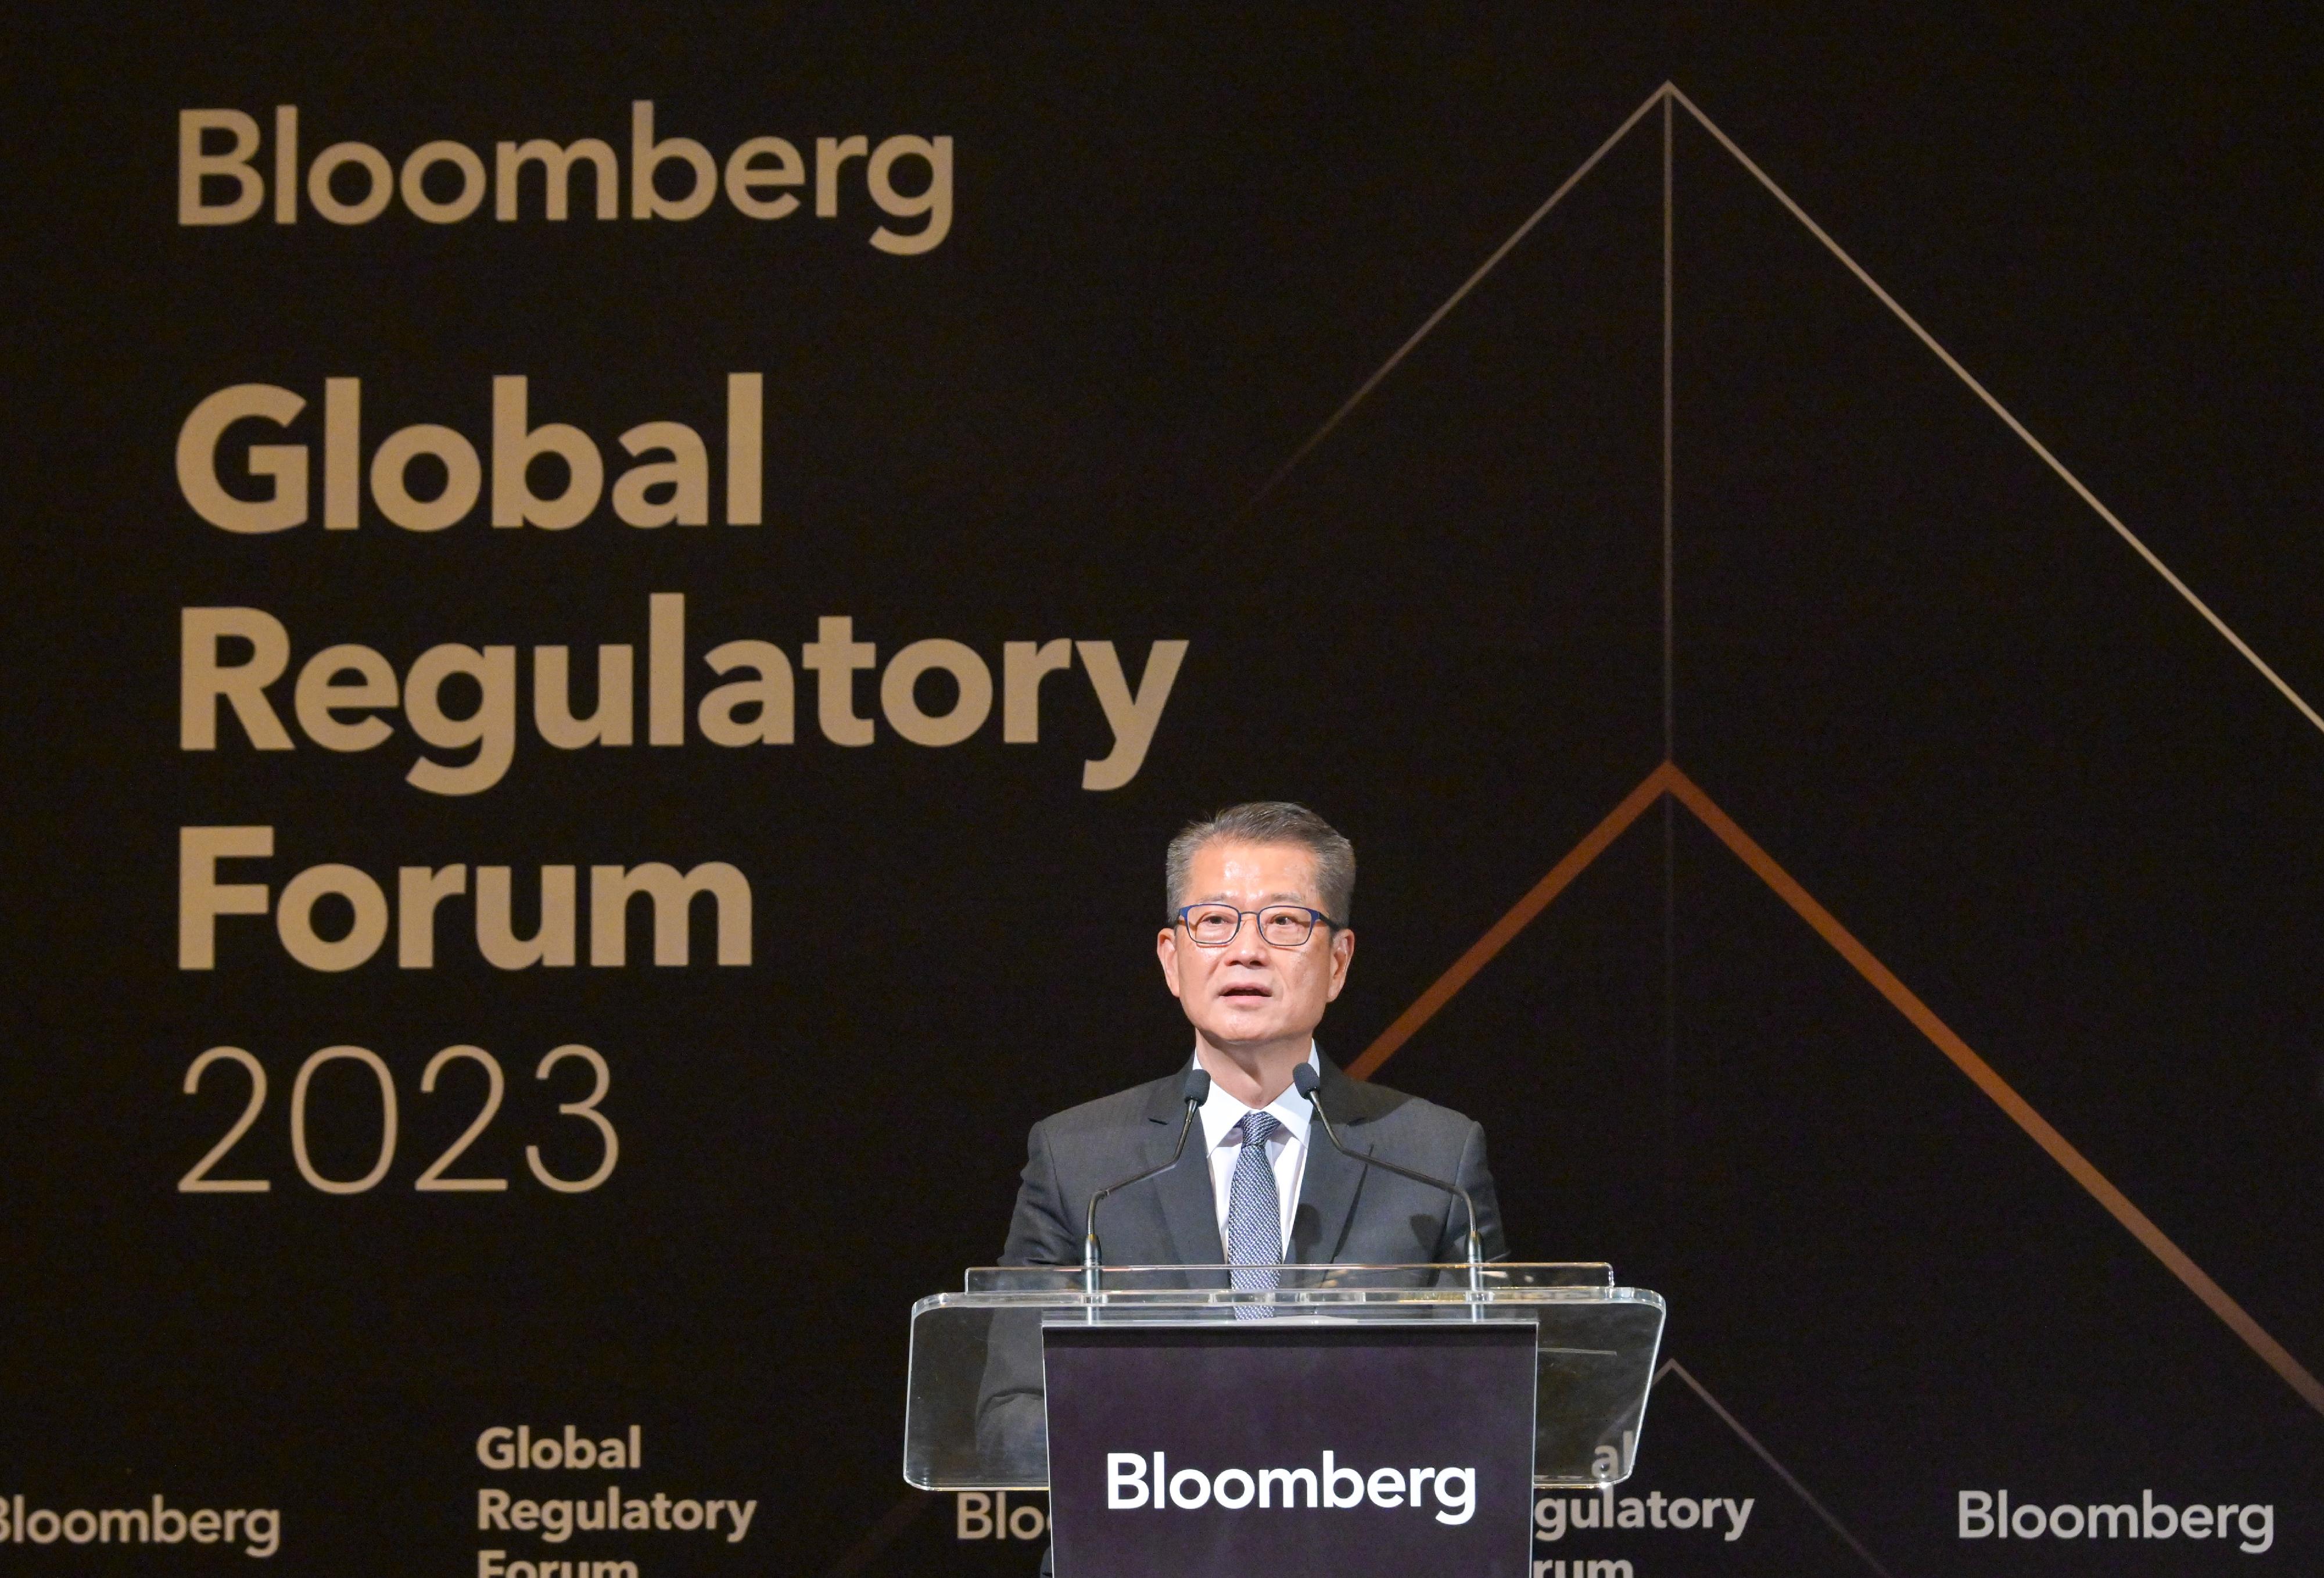 The Financial Secretary, Mr Paul Chan, speaks at the Bloomberg Global Regulatory Forum 2023 today (October 31).